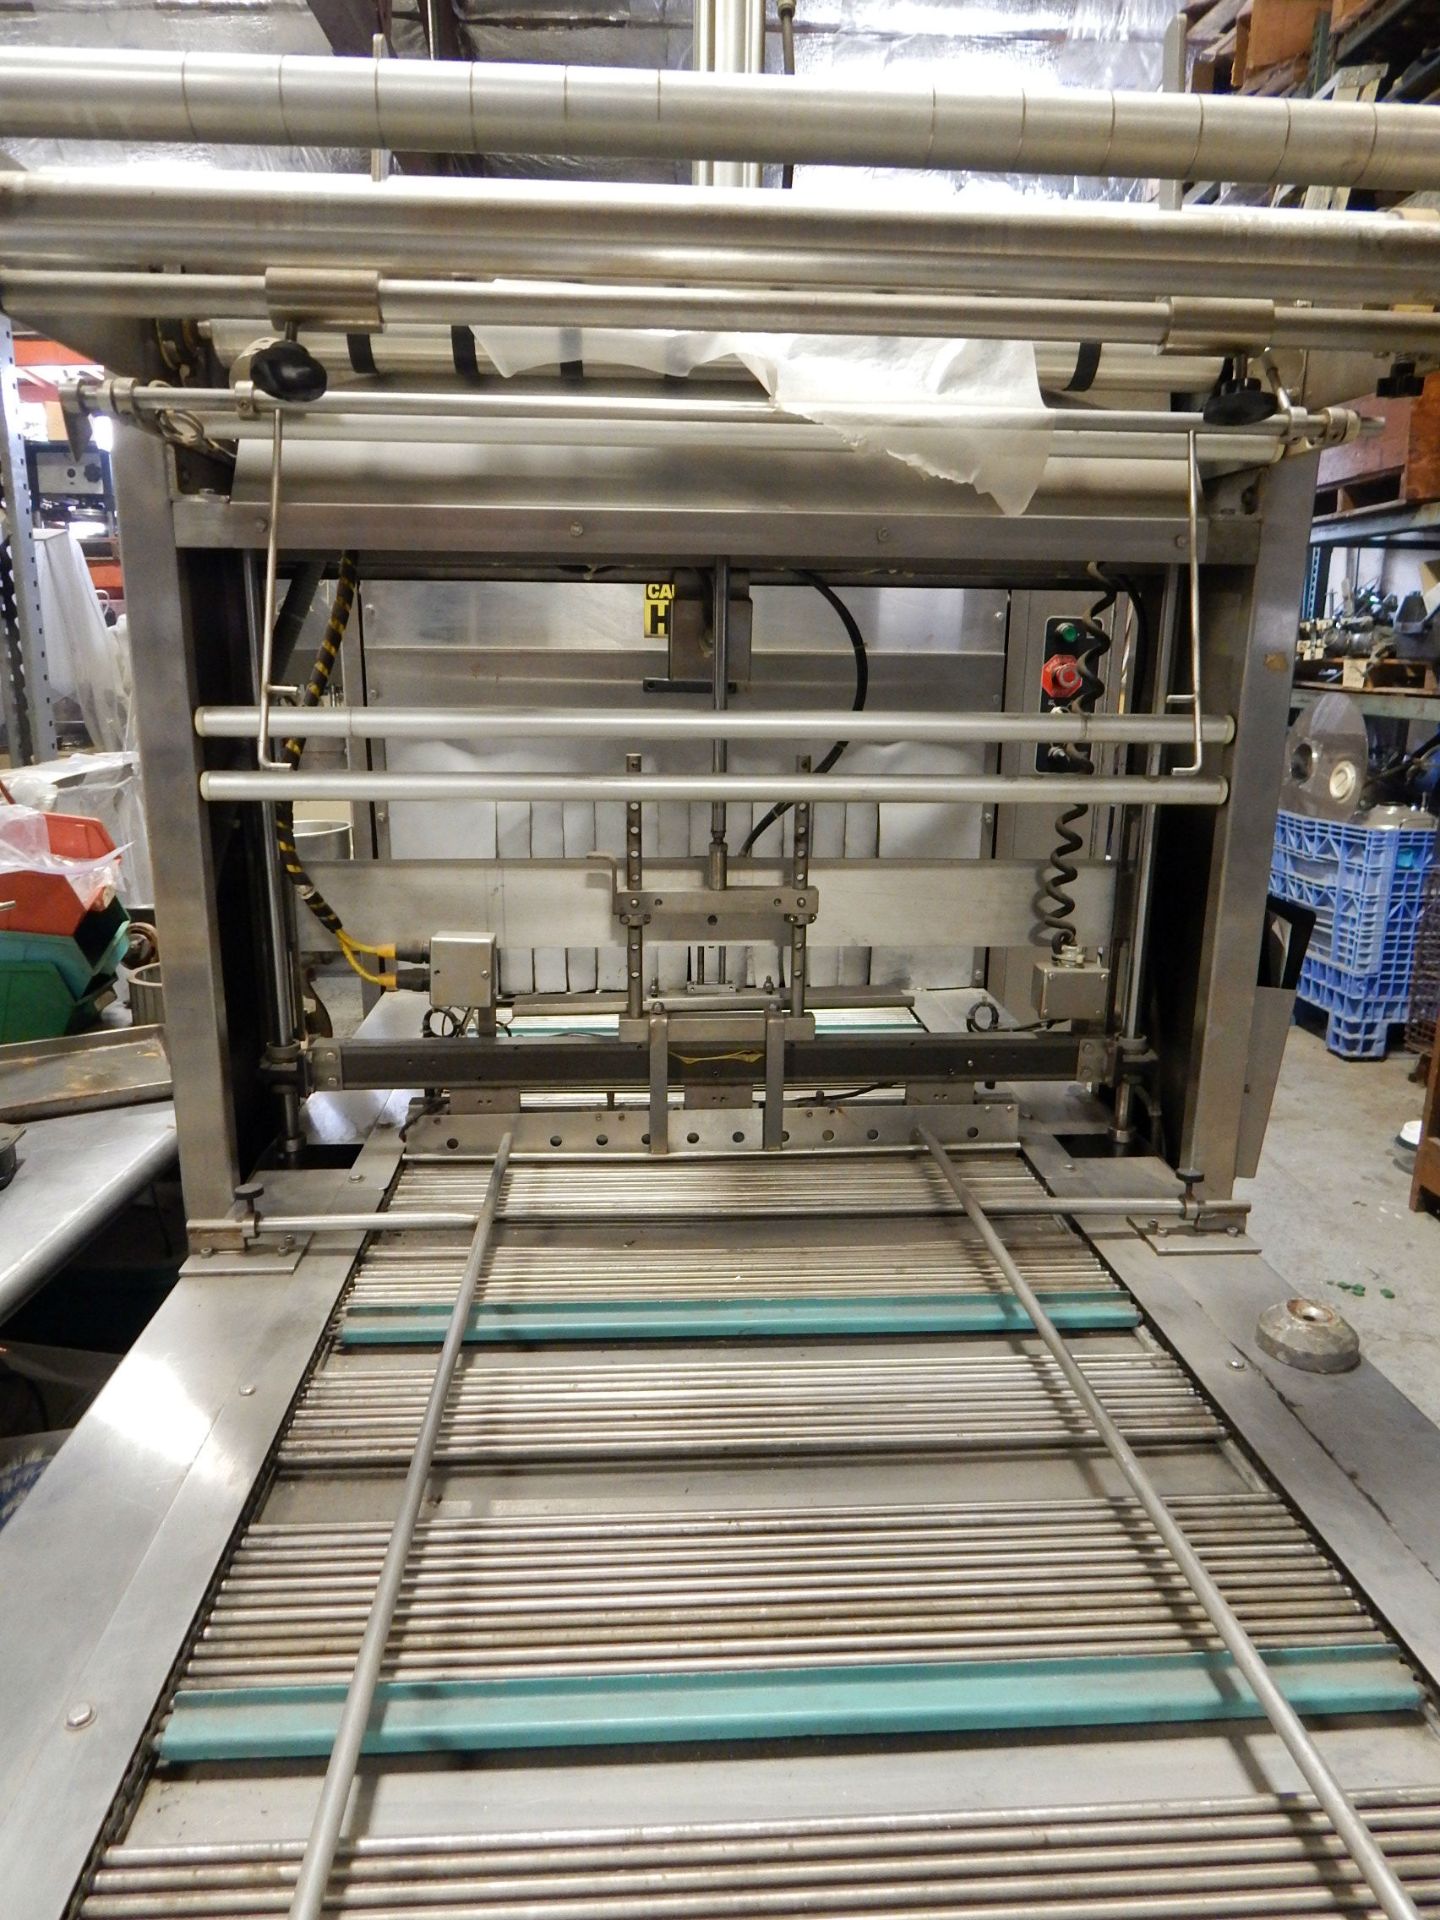 AUTOMATIC ALL STAINLESS STEEL CASE/TRAY OVERWRAPPER BY AUTOMATION PACKAGING INC. - Image 4 of 9